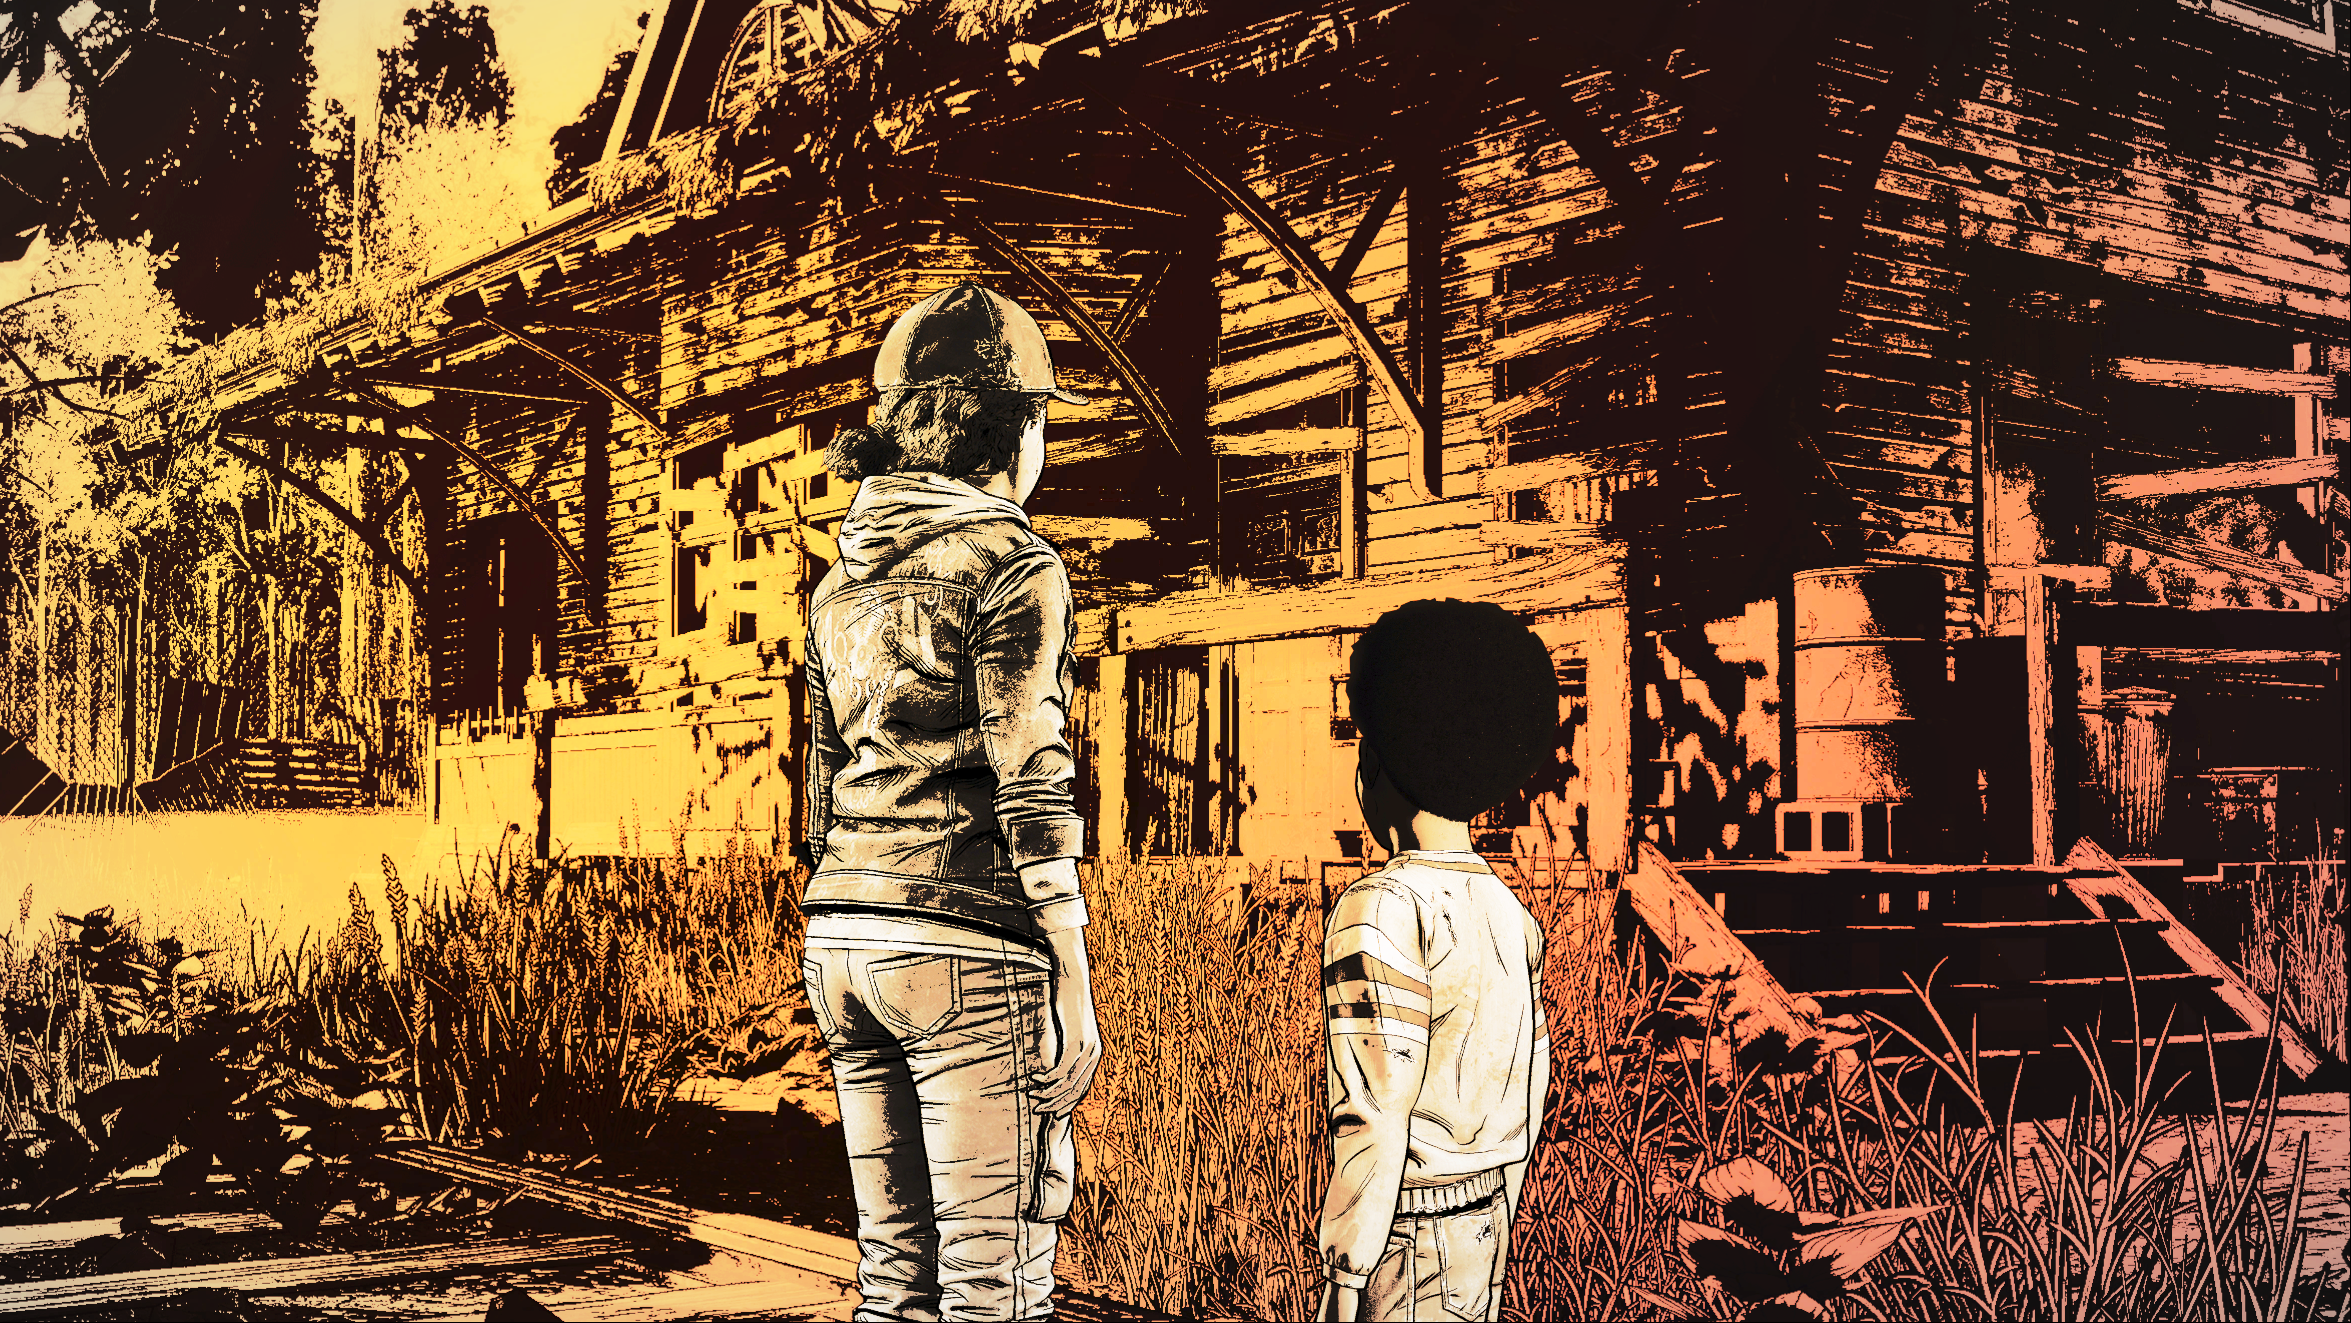 Video Game The Walking Dead: The Final Season HD Wallpaper | Background Image